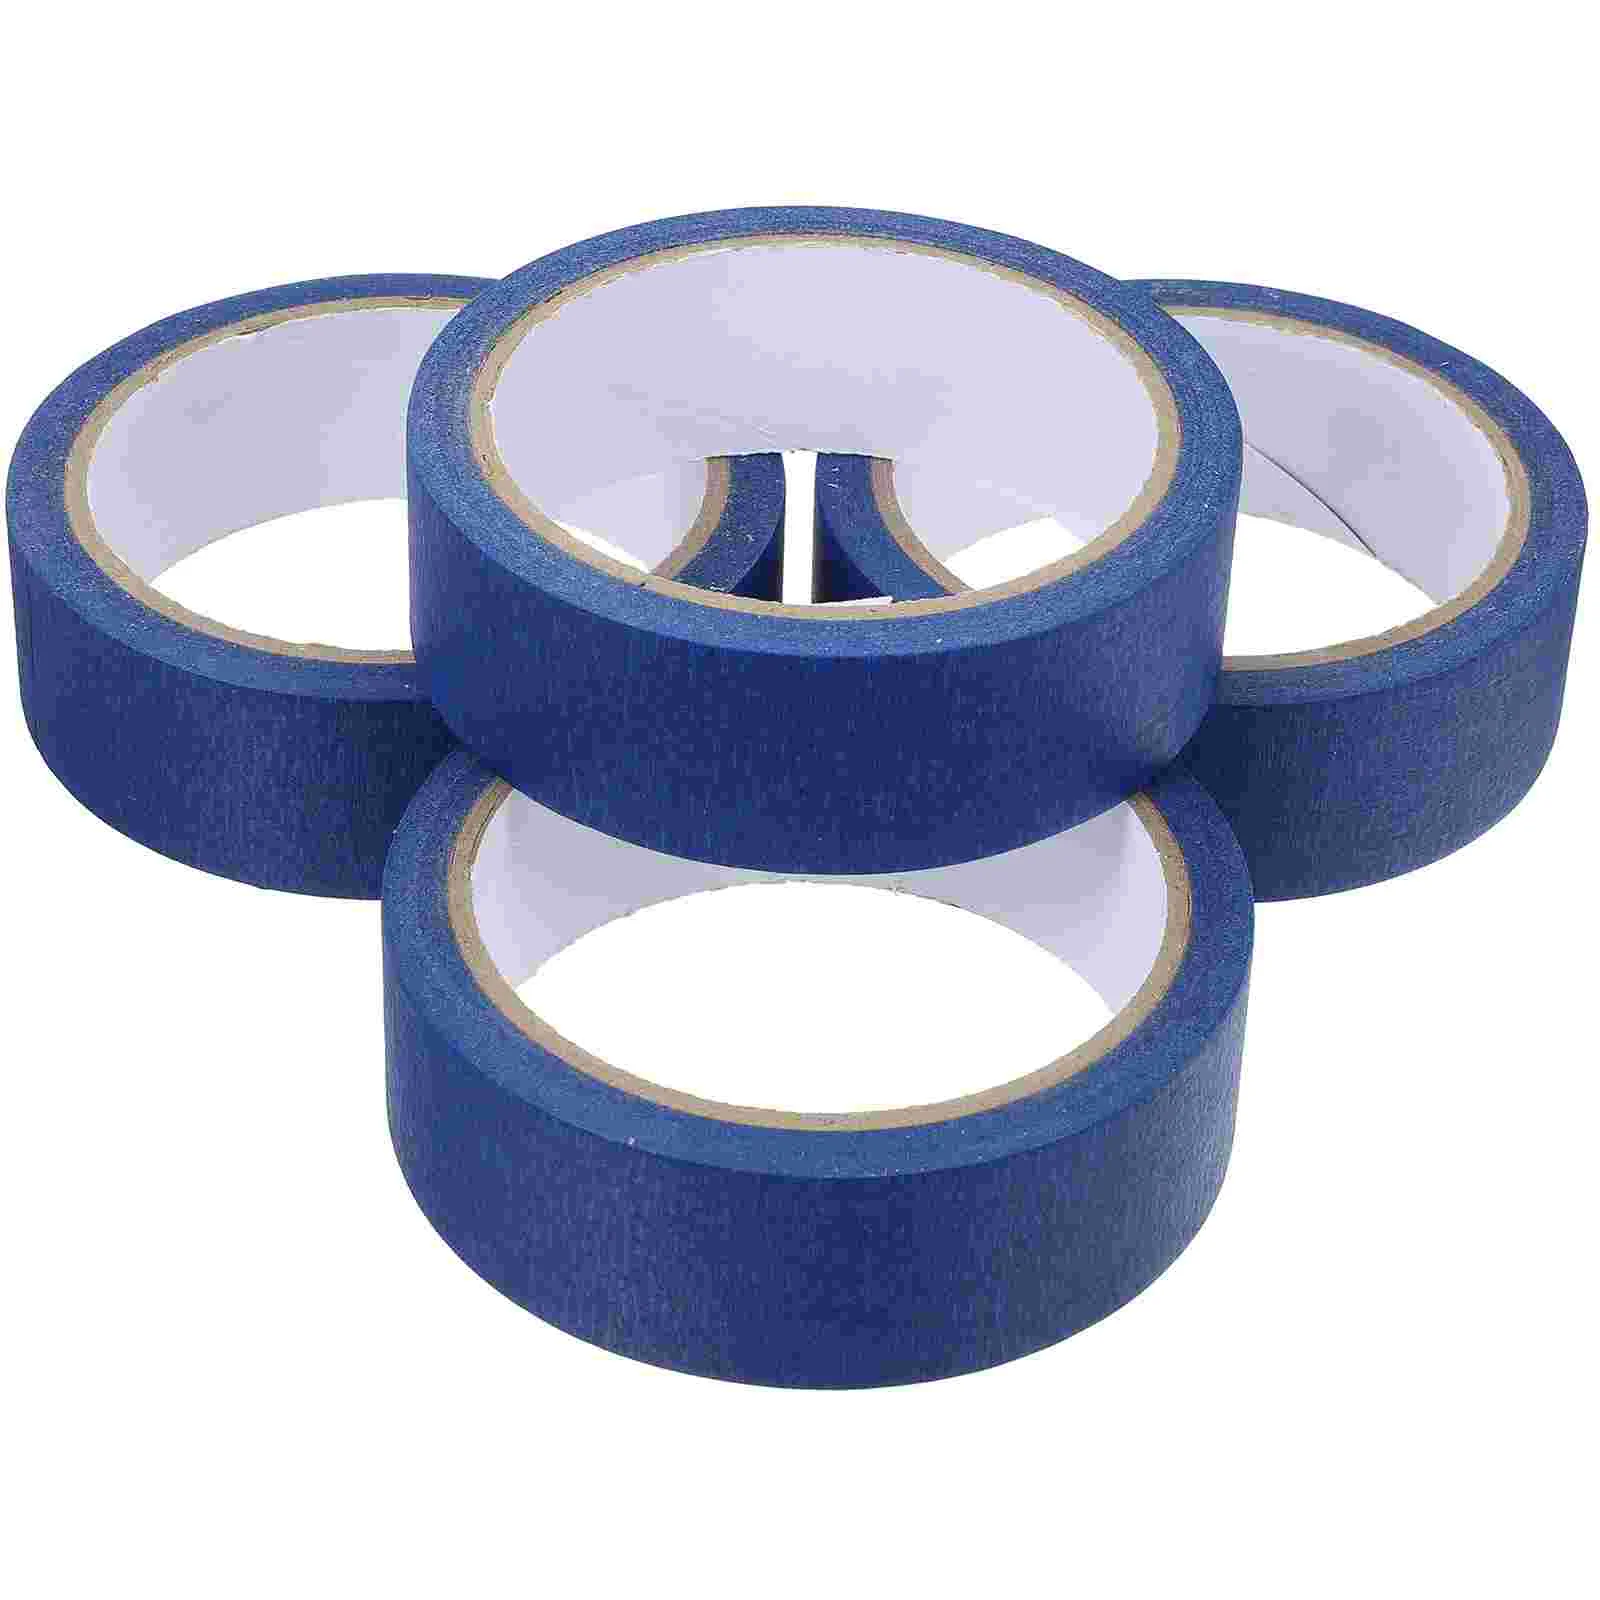 Blue Masking Tape DIY Tapes Crafts Adhesive Paint for Painting Painter Duct flyingbee 15mmx5m weird thing tv shows washi tape paper diy decorative adhesive tape stationery masking tapes supplies x0503